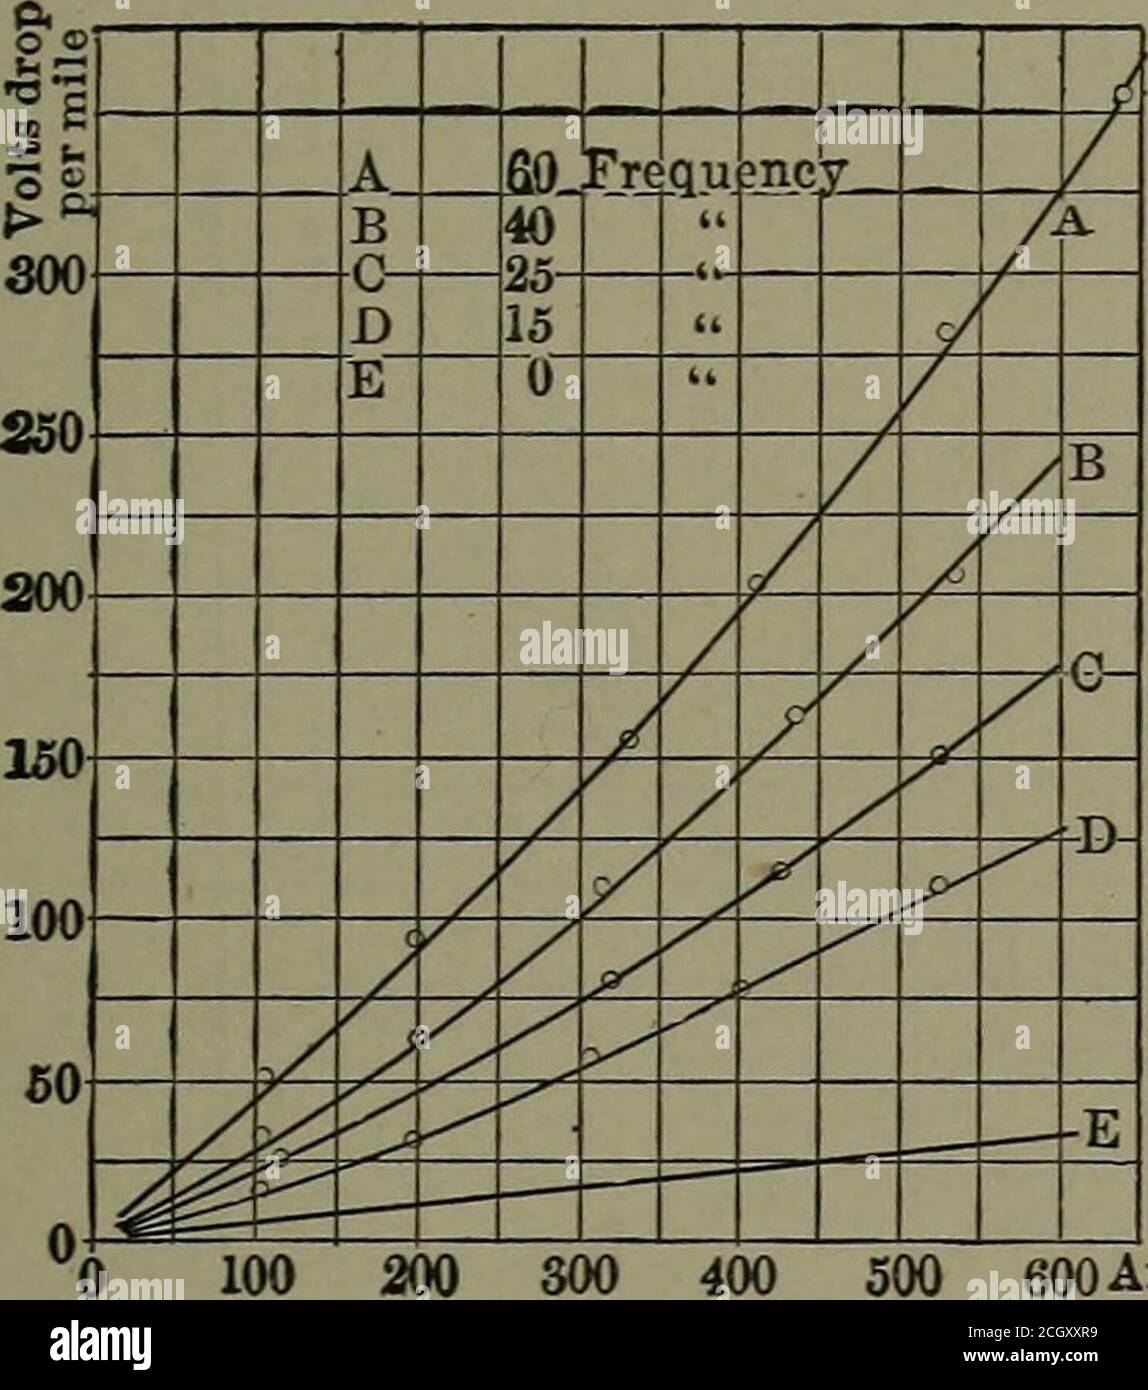 . Report of the Electric Railway Test Commission to the president of the Louisiana Purchase Exposition . riation of power-factor; the data for each frequency beingplotted in a single curve. Test No. 47. Double Track Alone.—The data calcu-lated from the results of the investigations on the double trackalone, are shown graphically in Figs. 142, 143, 144, and 145.These curves have been plotted in the same general manner aswere those of Figs. 138, 139, 140, and 141. In all cases the cur-rent values have been taken as abscissas. Fig. 142 shows thepressure drop per mile of track for various currents Stock Photo